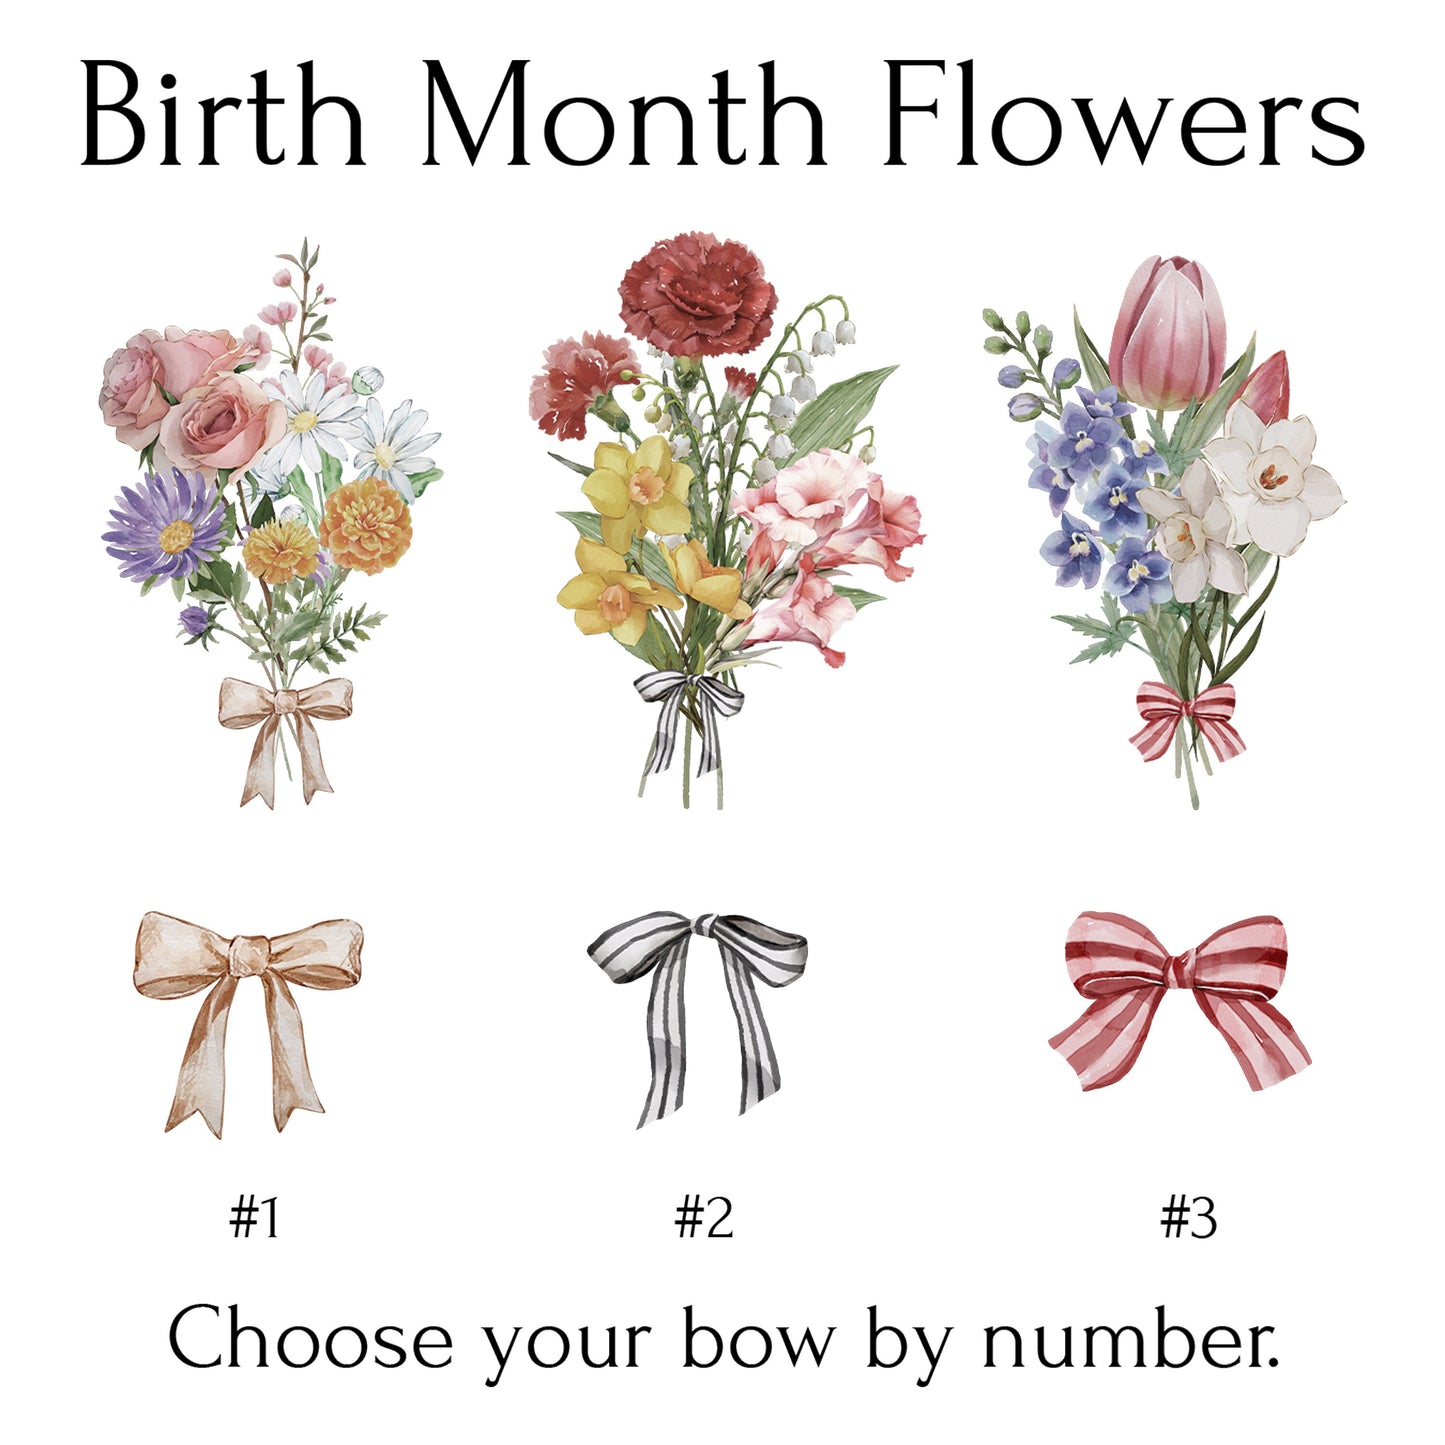 Personalized Gift for Mom and Grandma Birth Flower Bouquet Gift Custom Mother Day Gift Personalized Garden Print Birth Month Flower Art Sign